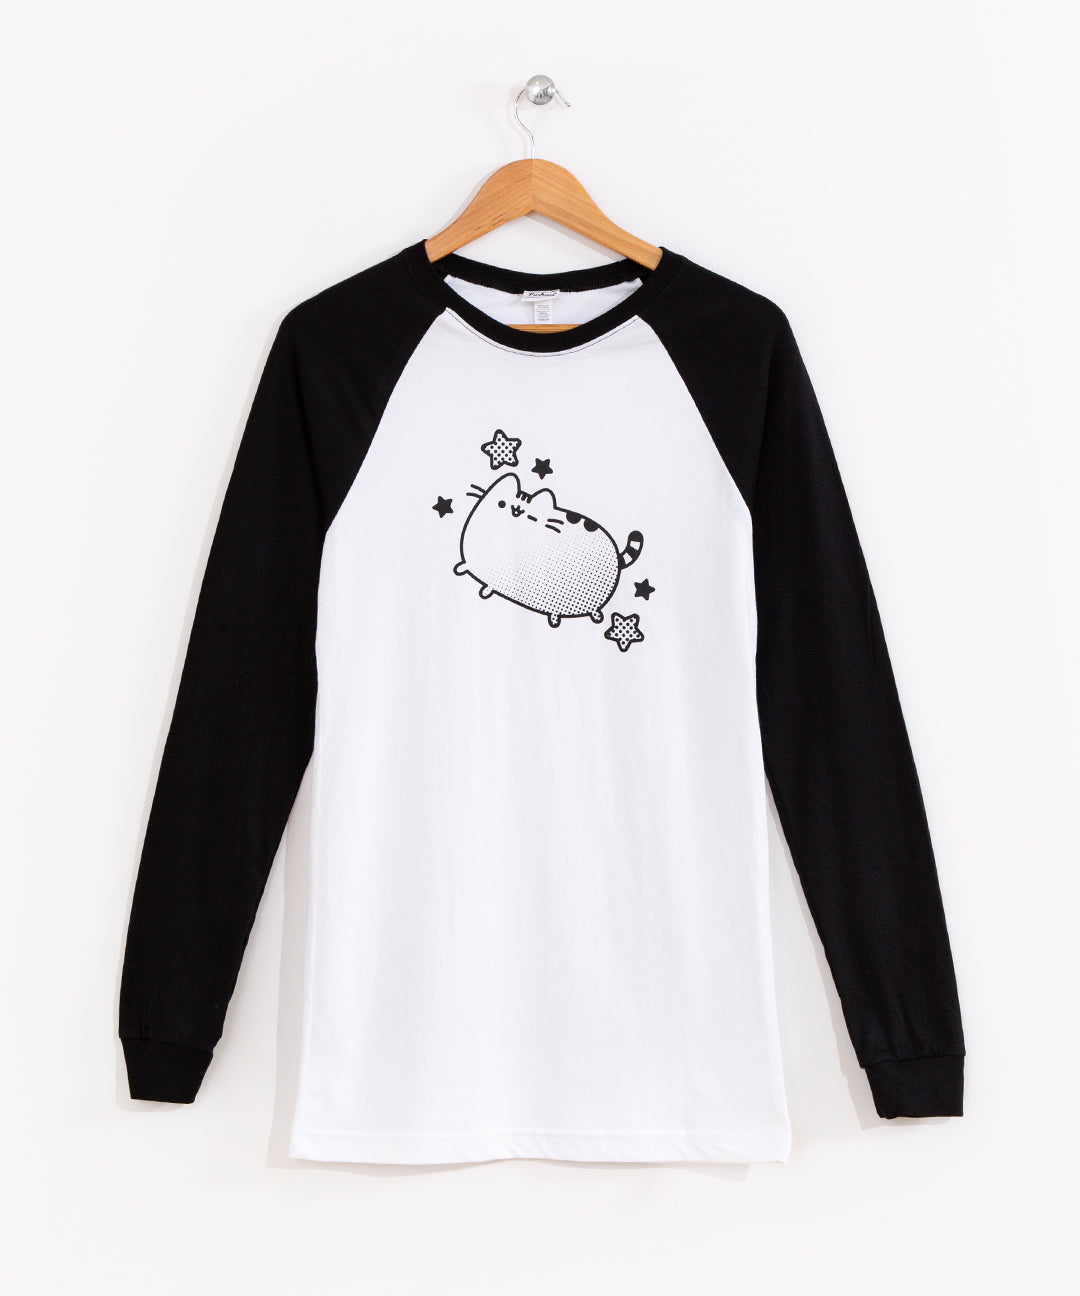 Best Selling Shopify Products on shop.pusheen.com-4